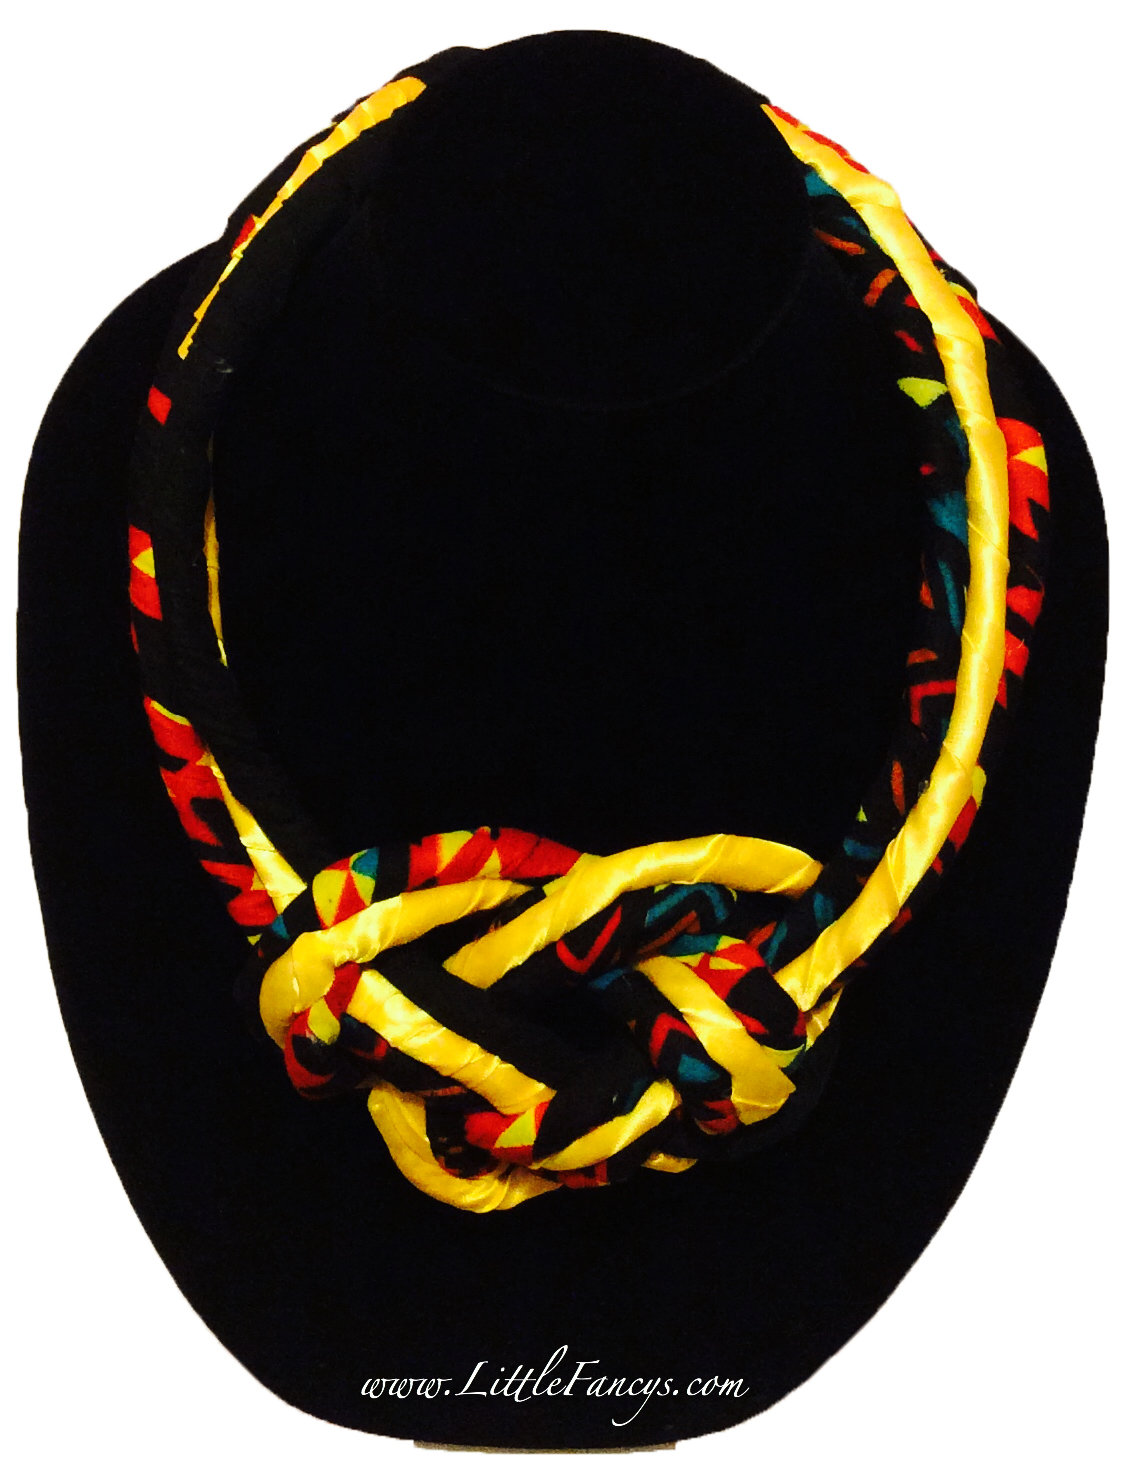 Knotted Statement Neck Piece